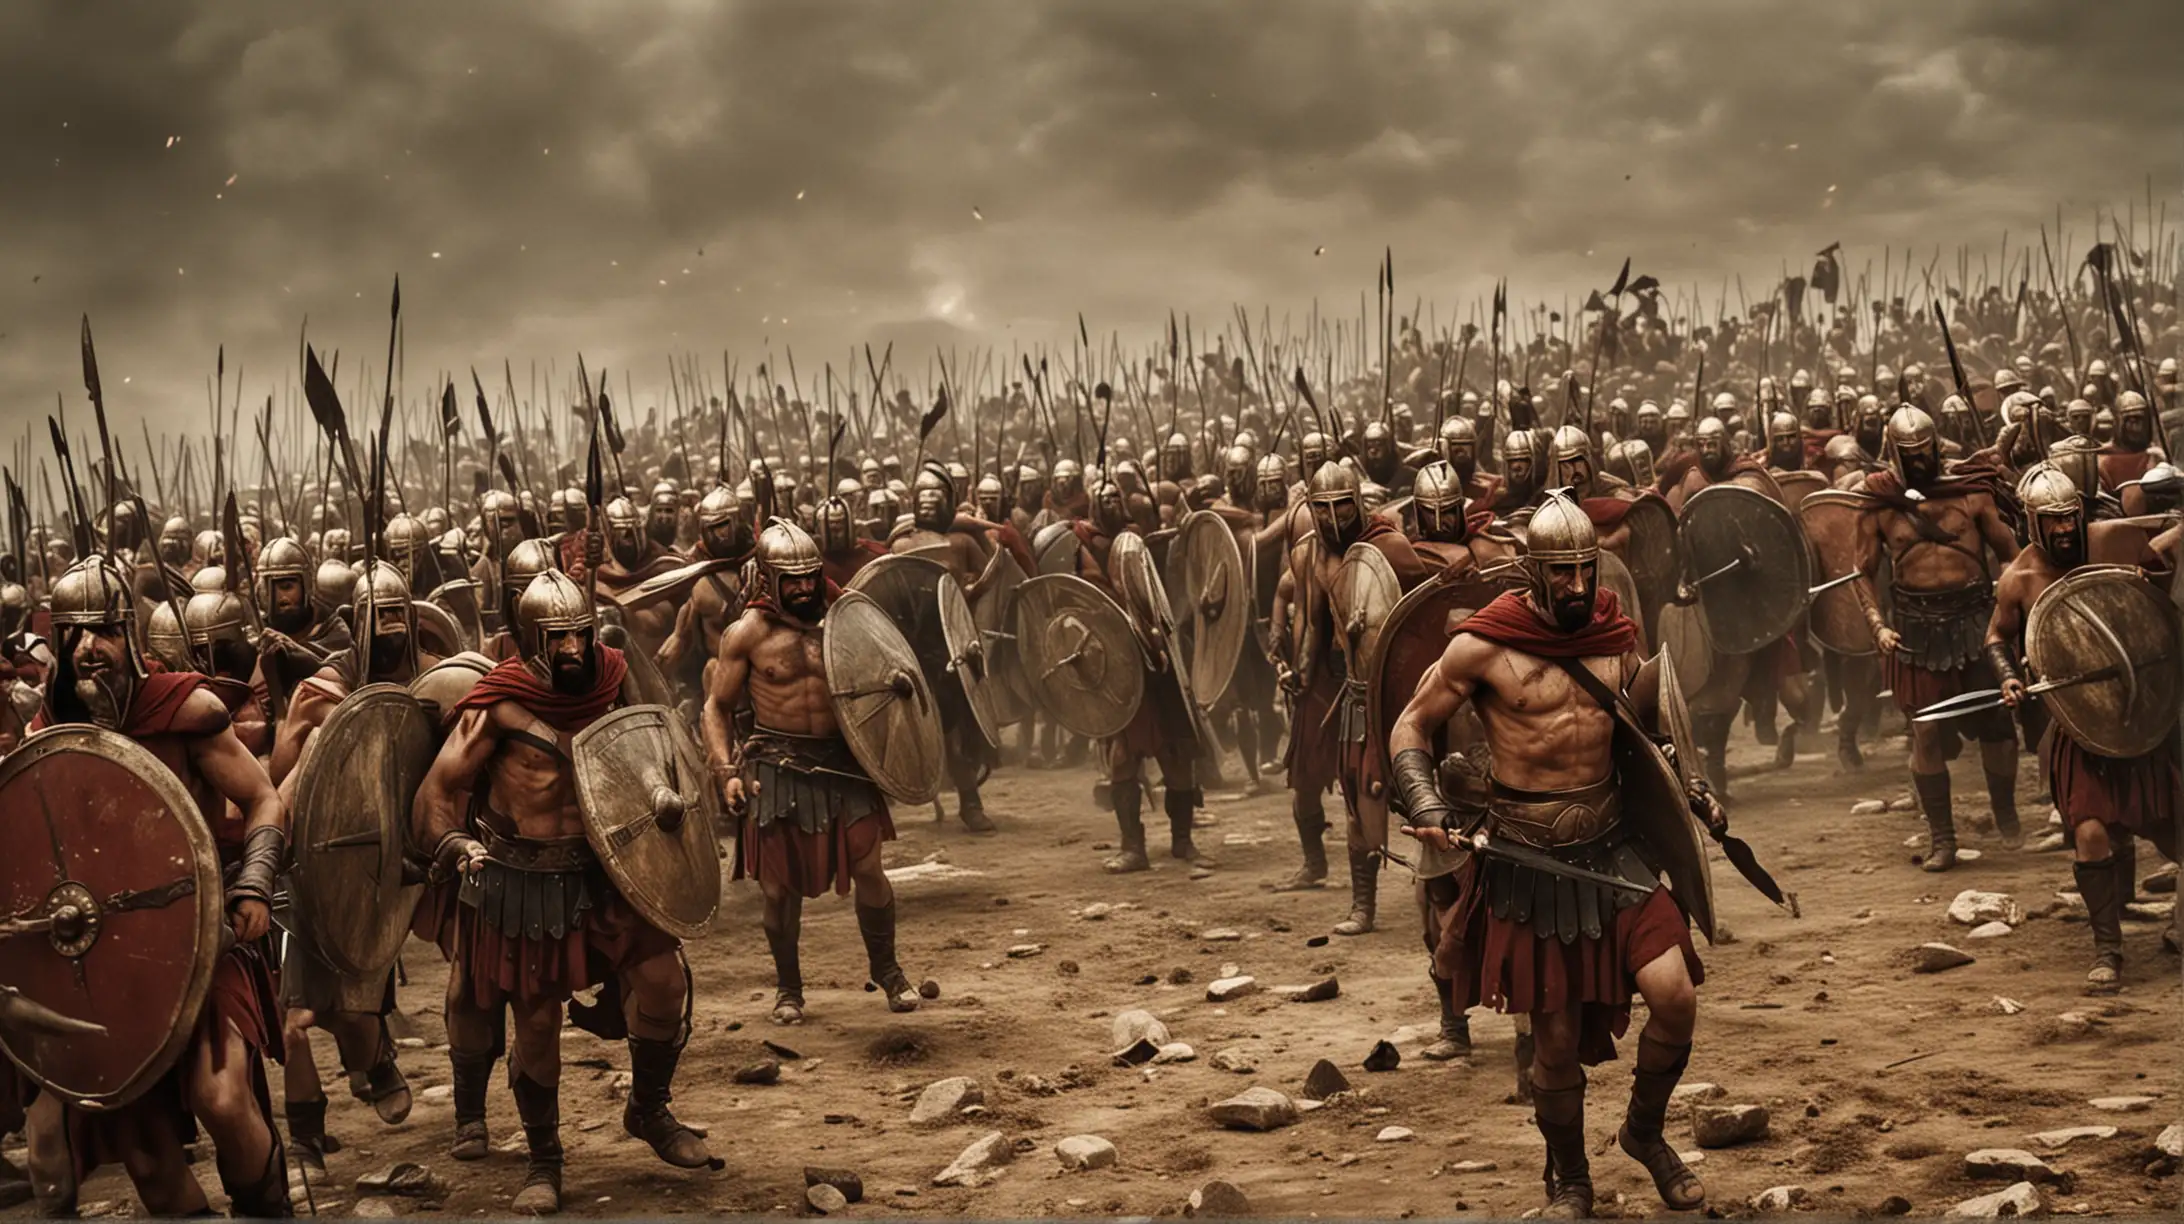 General Visualization Prompt: Generate an image that portrays the Spartan code of honor, depicting Leonidas and his warriors exemplifying the virtues of bravery, loyalty, and self-sacrifice. The scene should convey the unwavering commitment of the Spartans to their ideals and the enduring legacy of their courage.

Detailed Image Description: Create an illustration of Leonidas and his warriors engaged in a fierce battle against the Persians, their actions guided by the strict code of honor that defines Spartan society. Despite being outnumbered, the Spartans fight with unmatched ferocity and determination, their shields locked together in a formidable phalanx formation. The image captures the intensity and chaos of battle, with the warriors displaying remarkable skill and bravery as they confront the enemy. Through their actions, Leonidas and his men embody the timeless ideals of honor, duty, and sacrifice, inspiring viewers with their unwavering commitment to their principles.